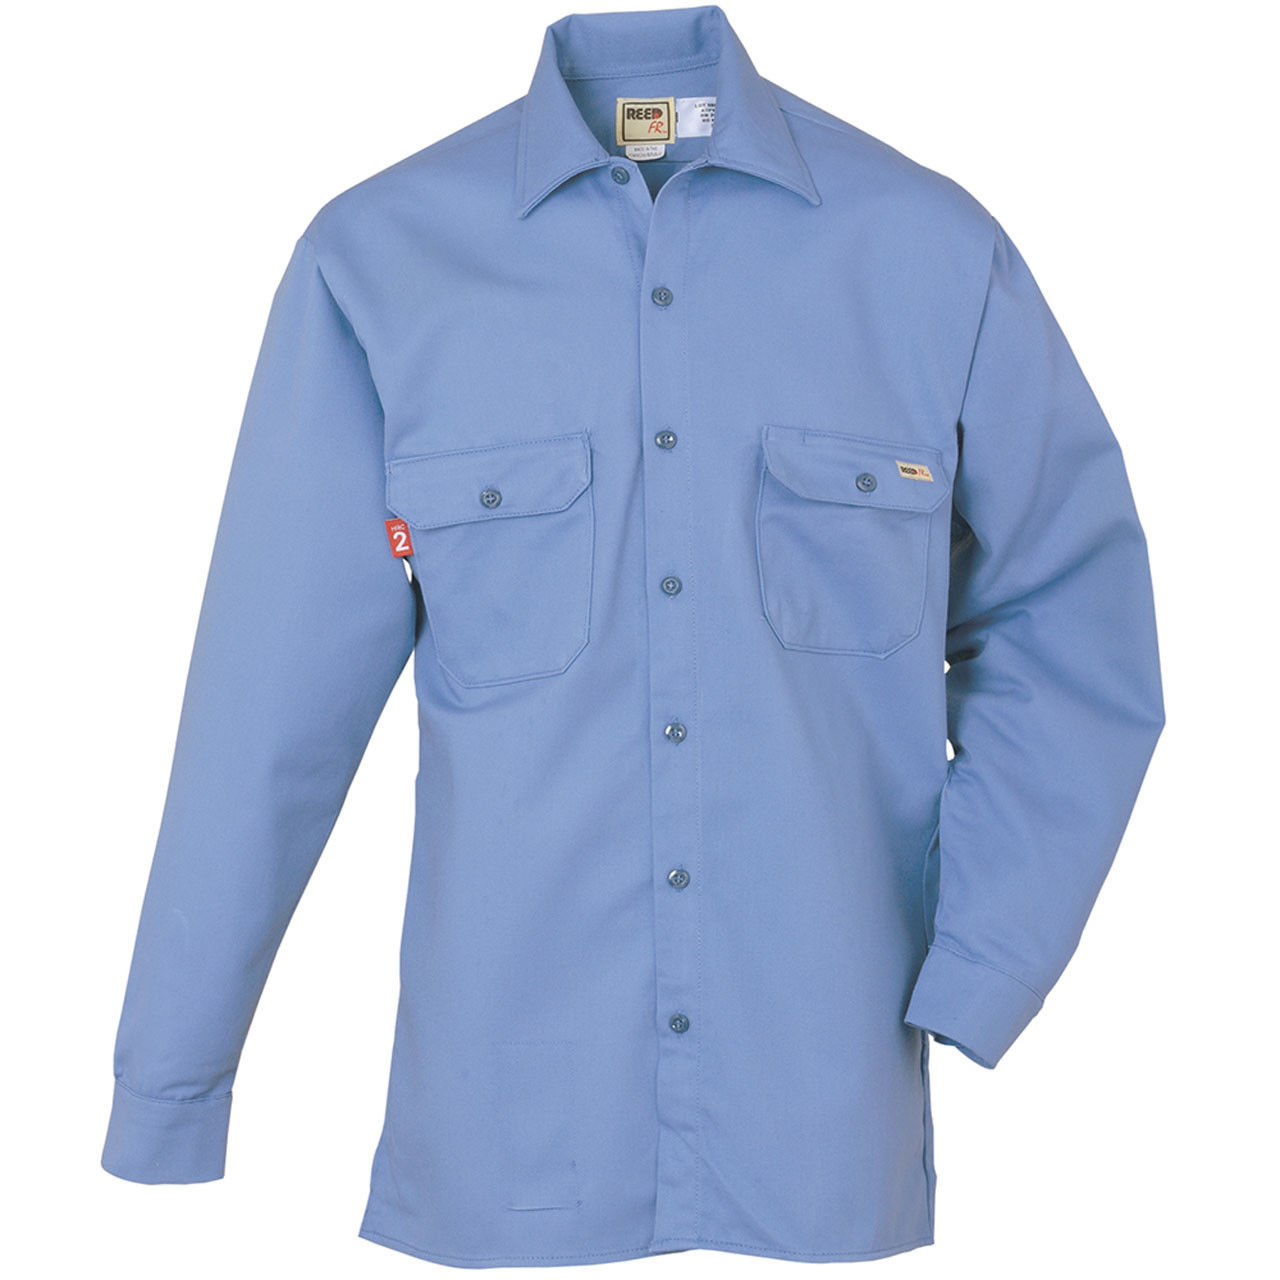 Flame Resistant Light Blue Work Shirts Questions & Answers